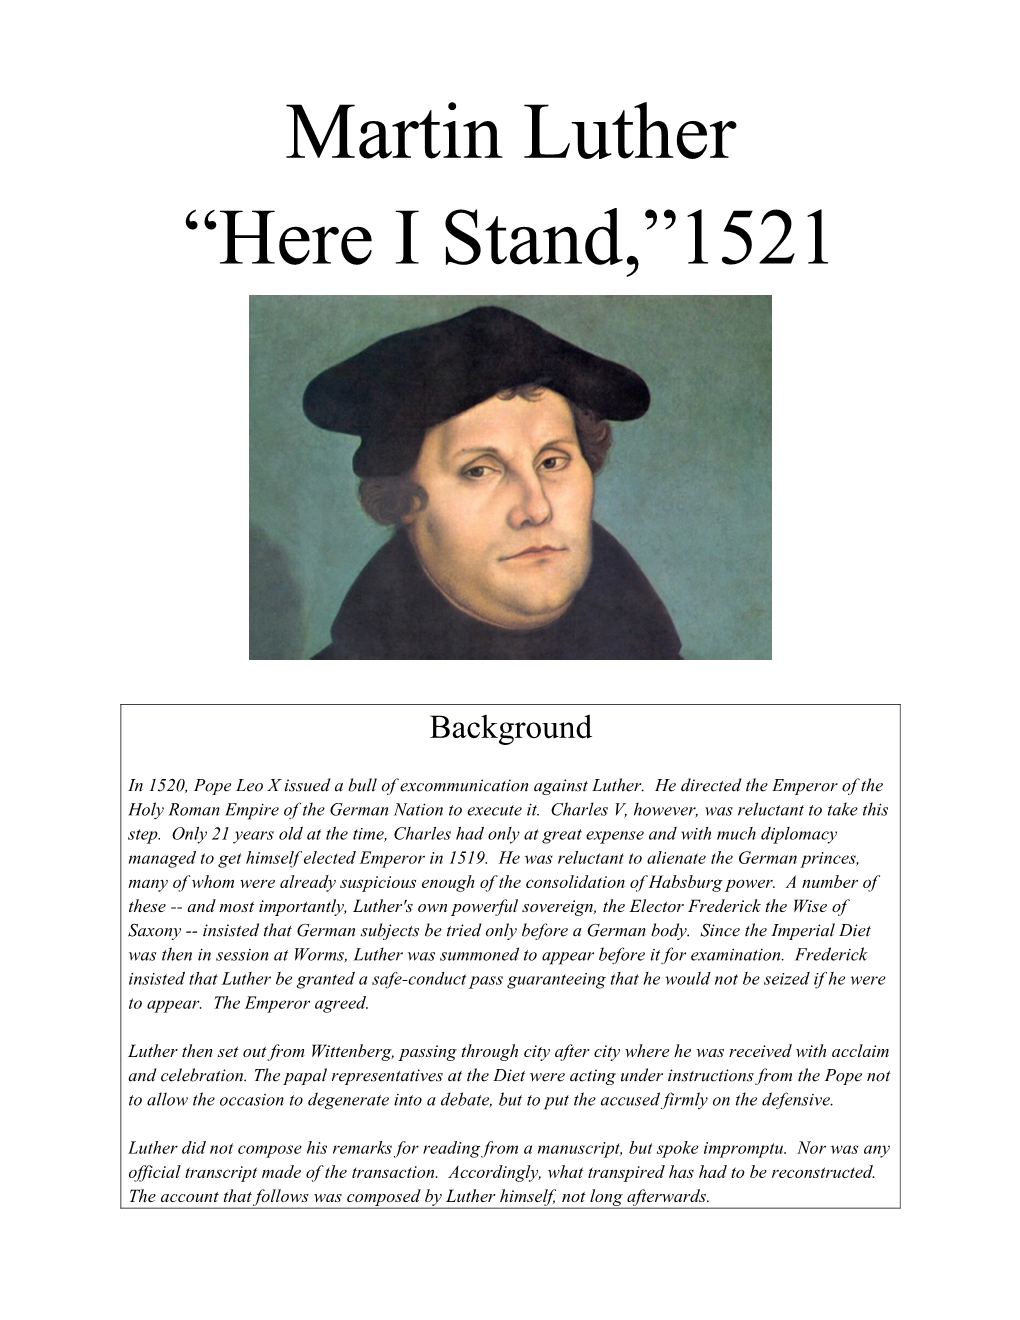 In 1520, Pope Leo X Issued a Bull of Excommunication Against Luther. He Directed the Emperor